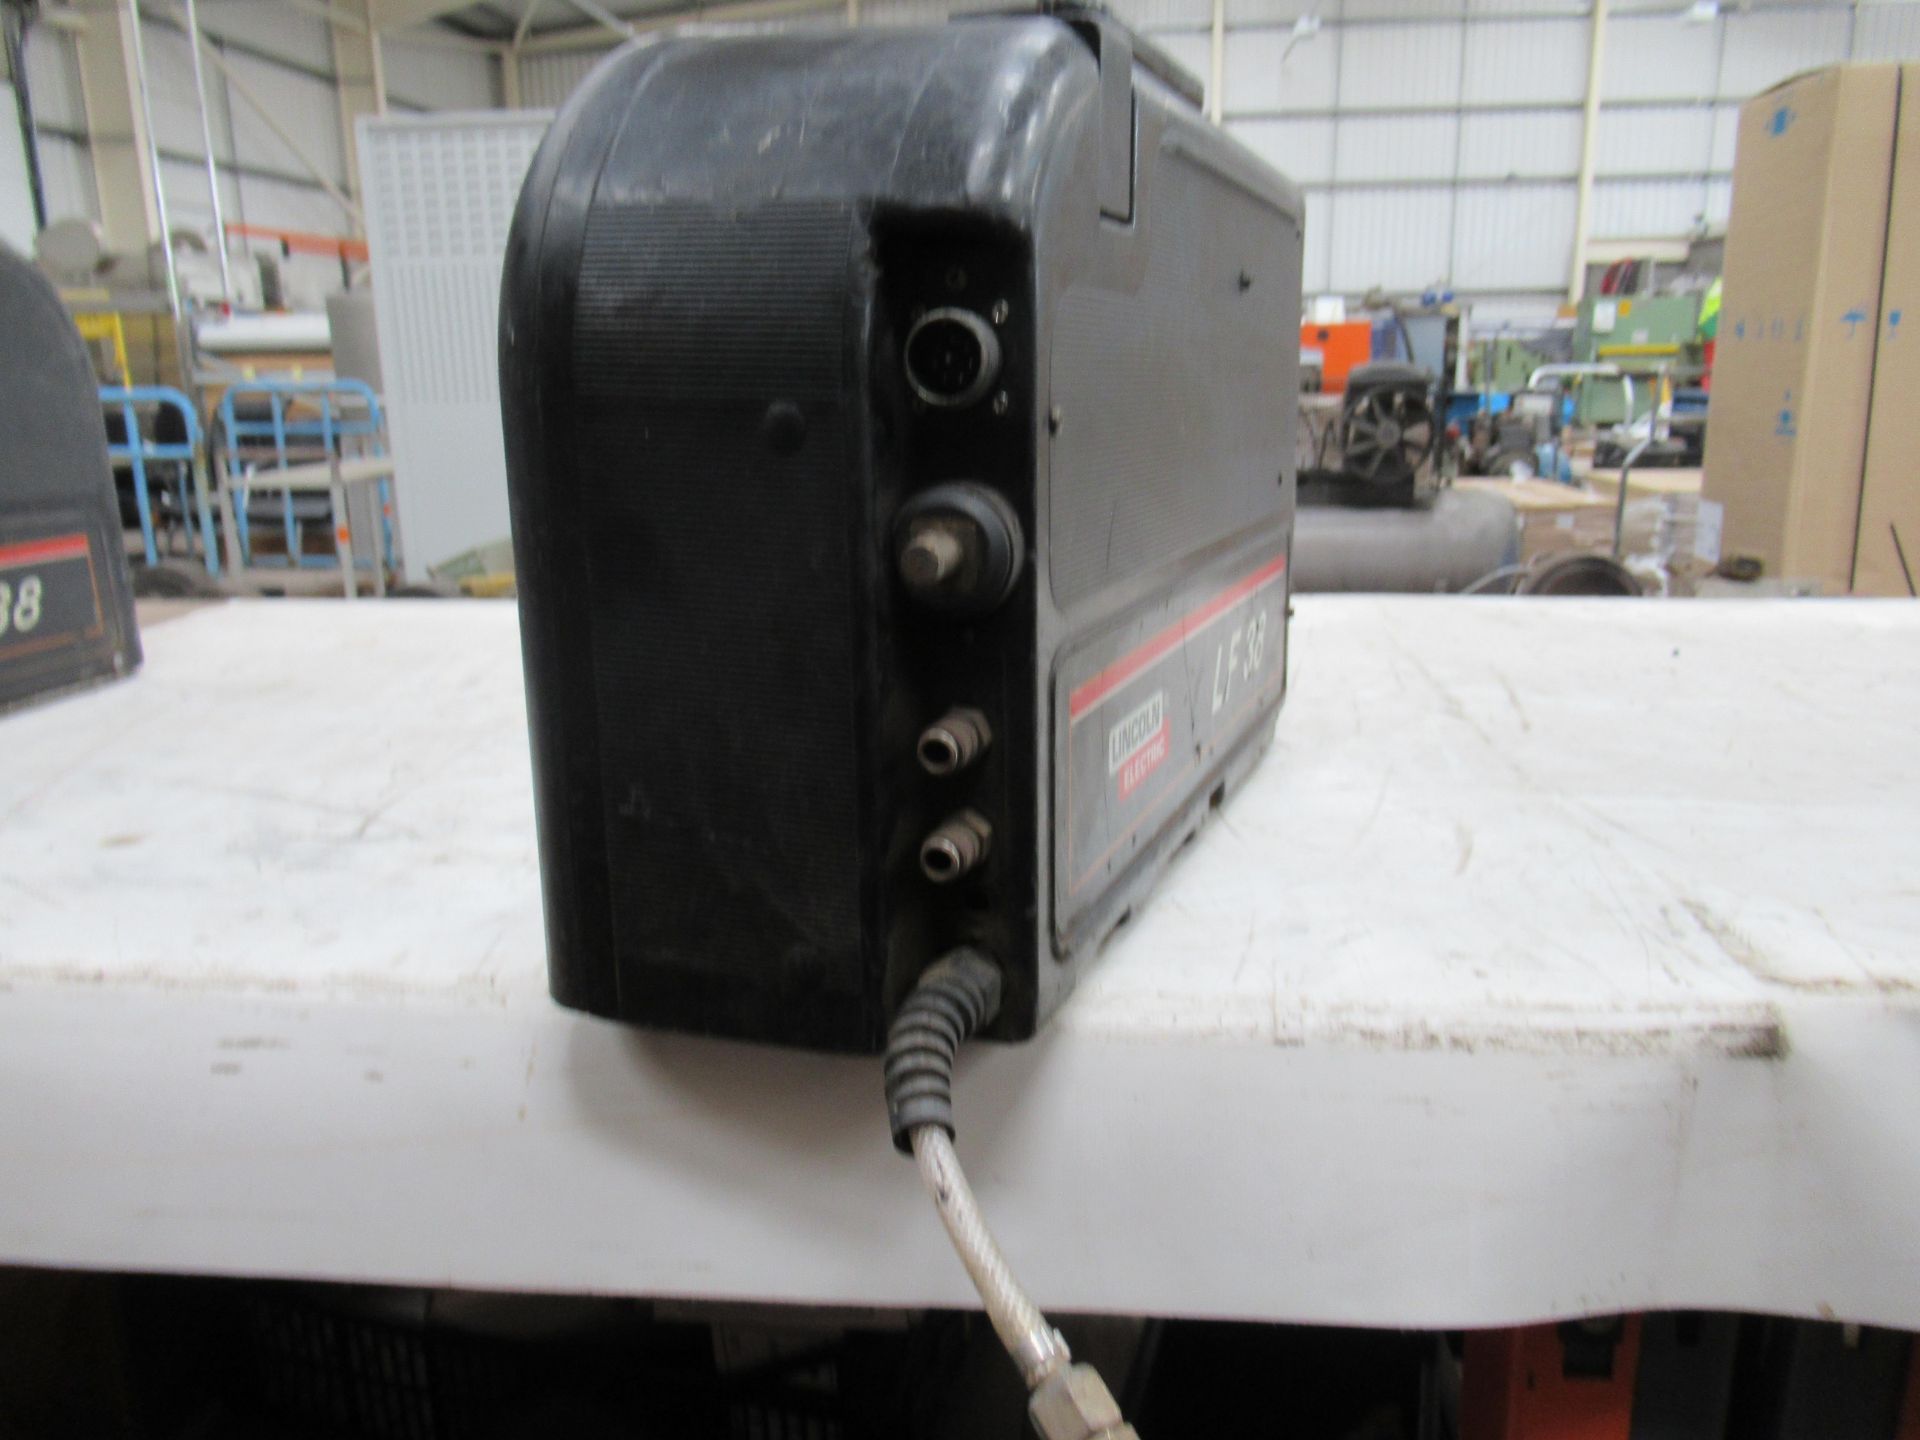 Lincoln Electric LF38 Portable Wire Feed - Image 4 of 5